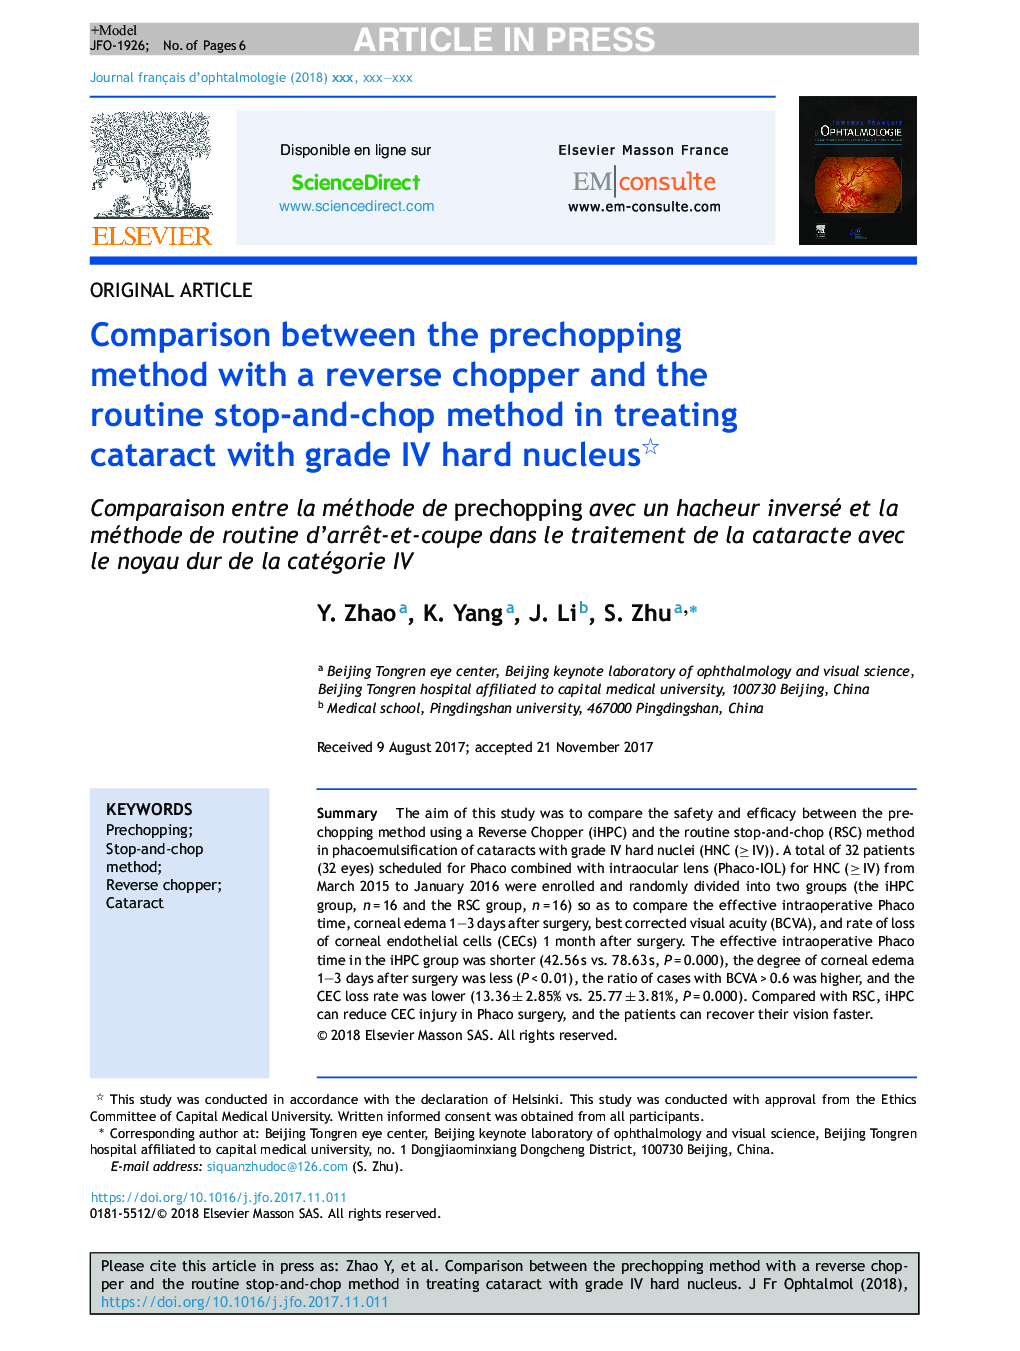 Comparison between the prechopping method with a reverse chopper and the routine stop-and-chop method in treating cataract with grade IV hard nucleus